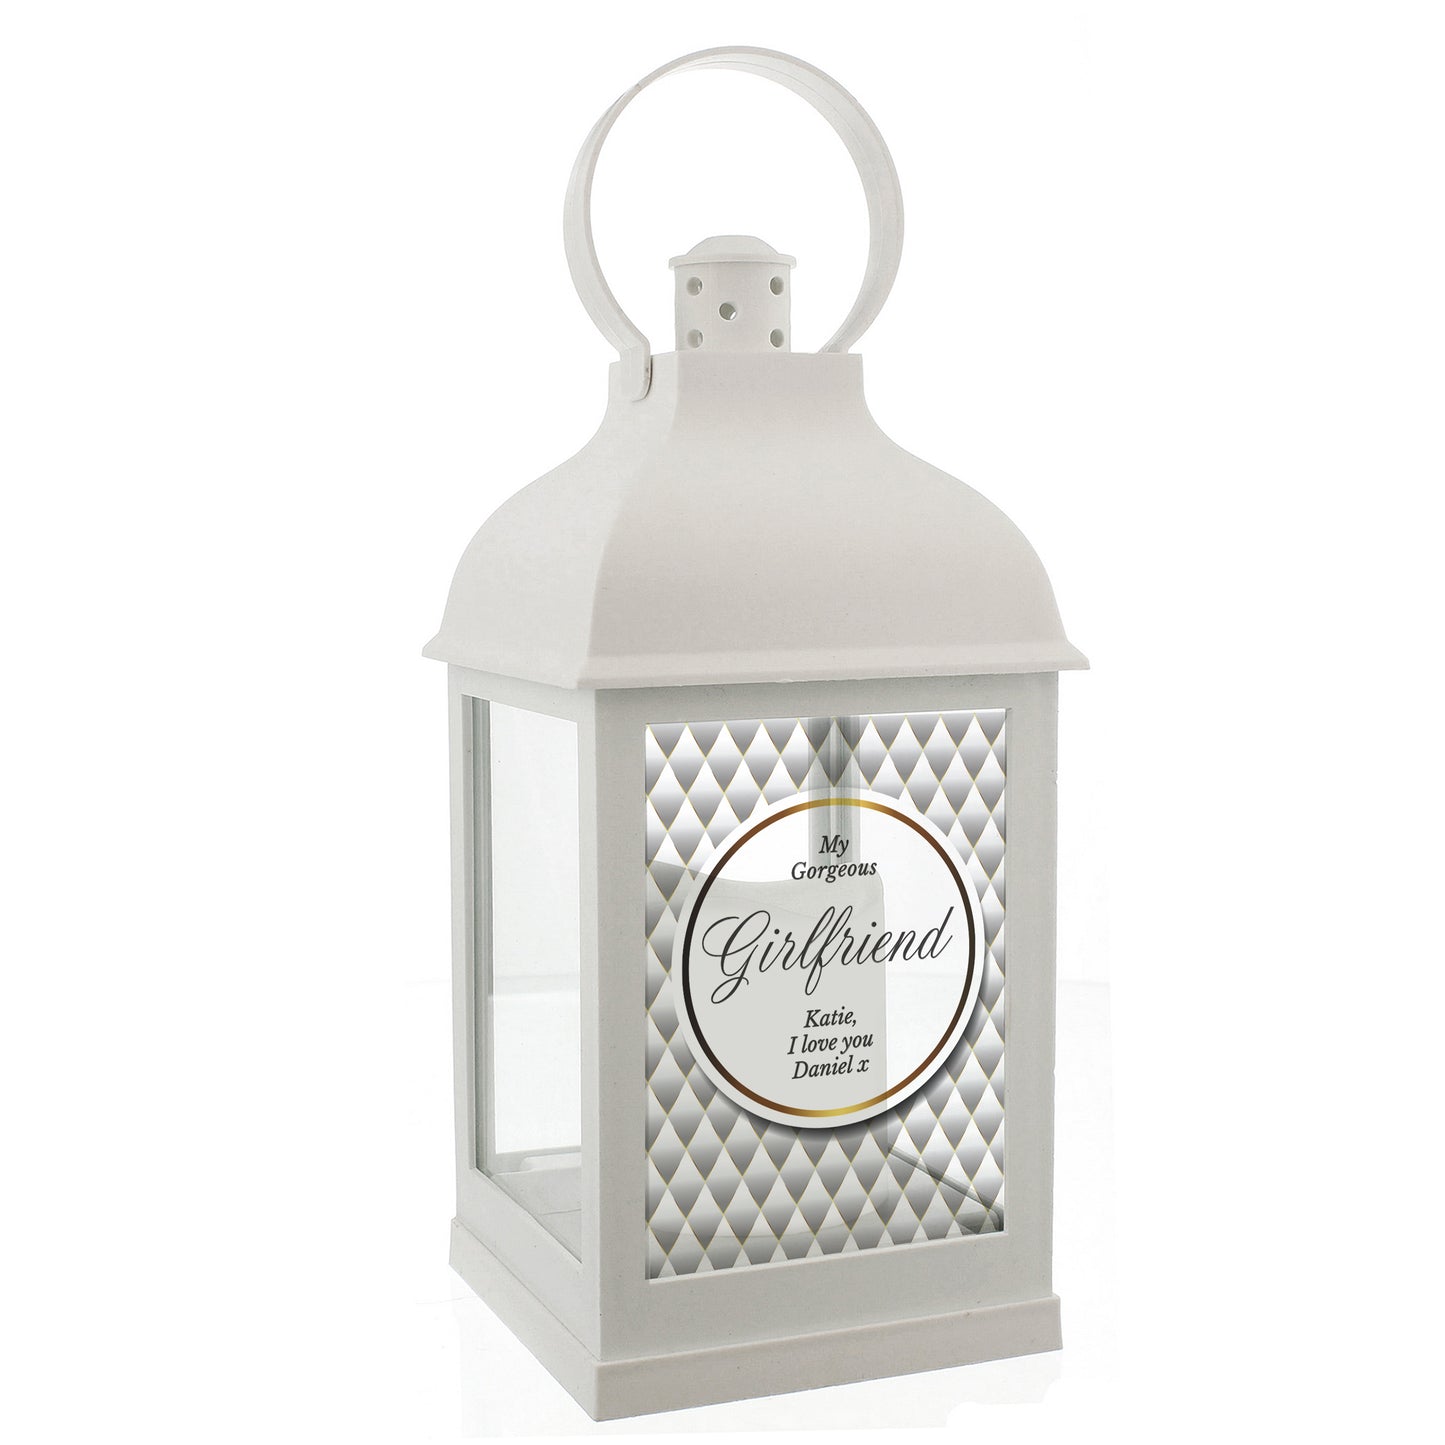 Personalised Opulent White Lantern - Suitable for Any Occasion